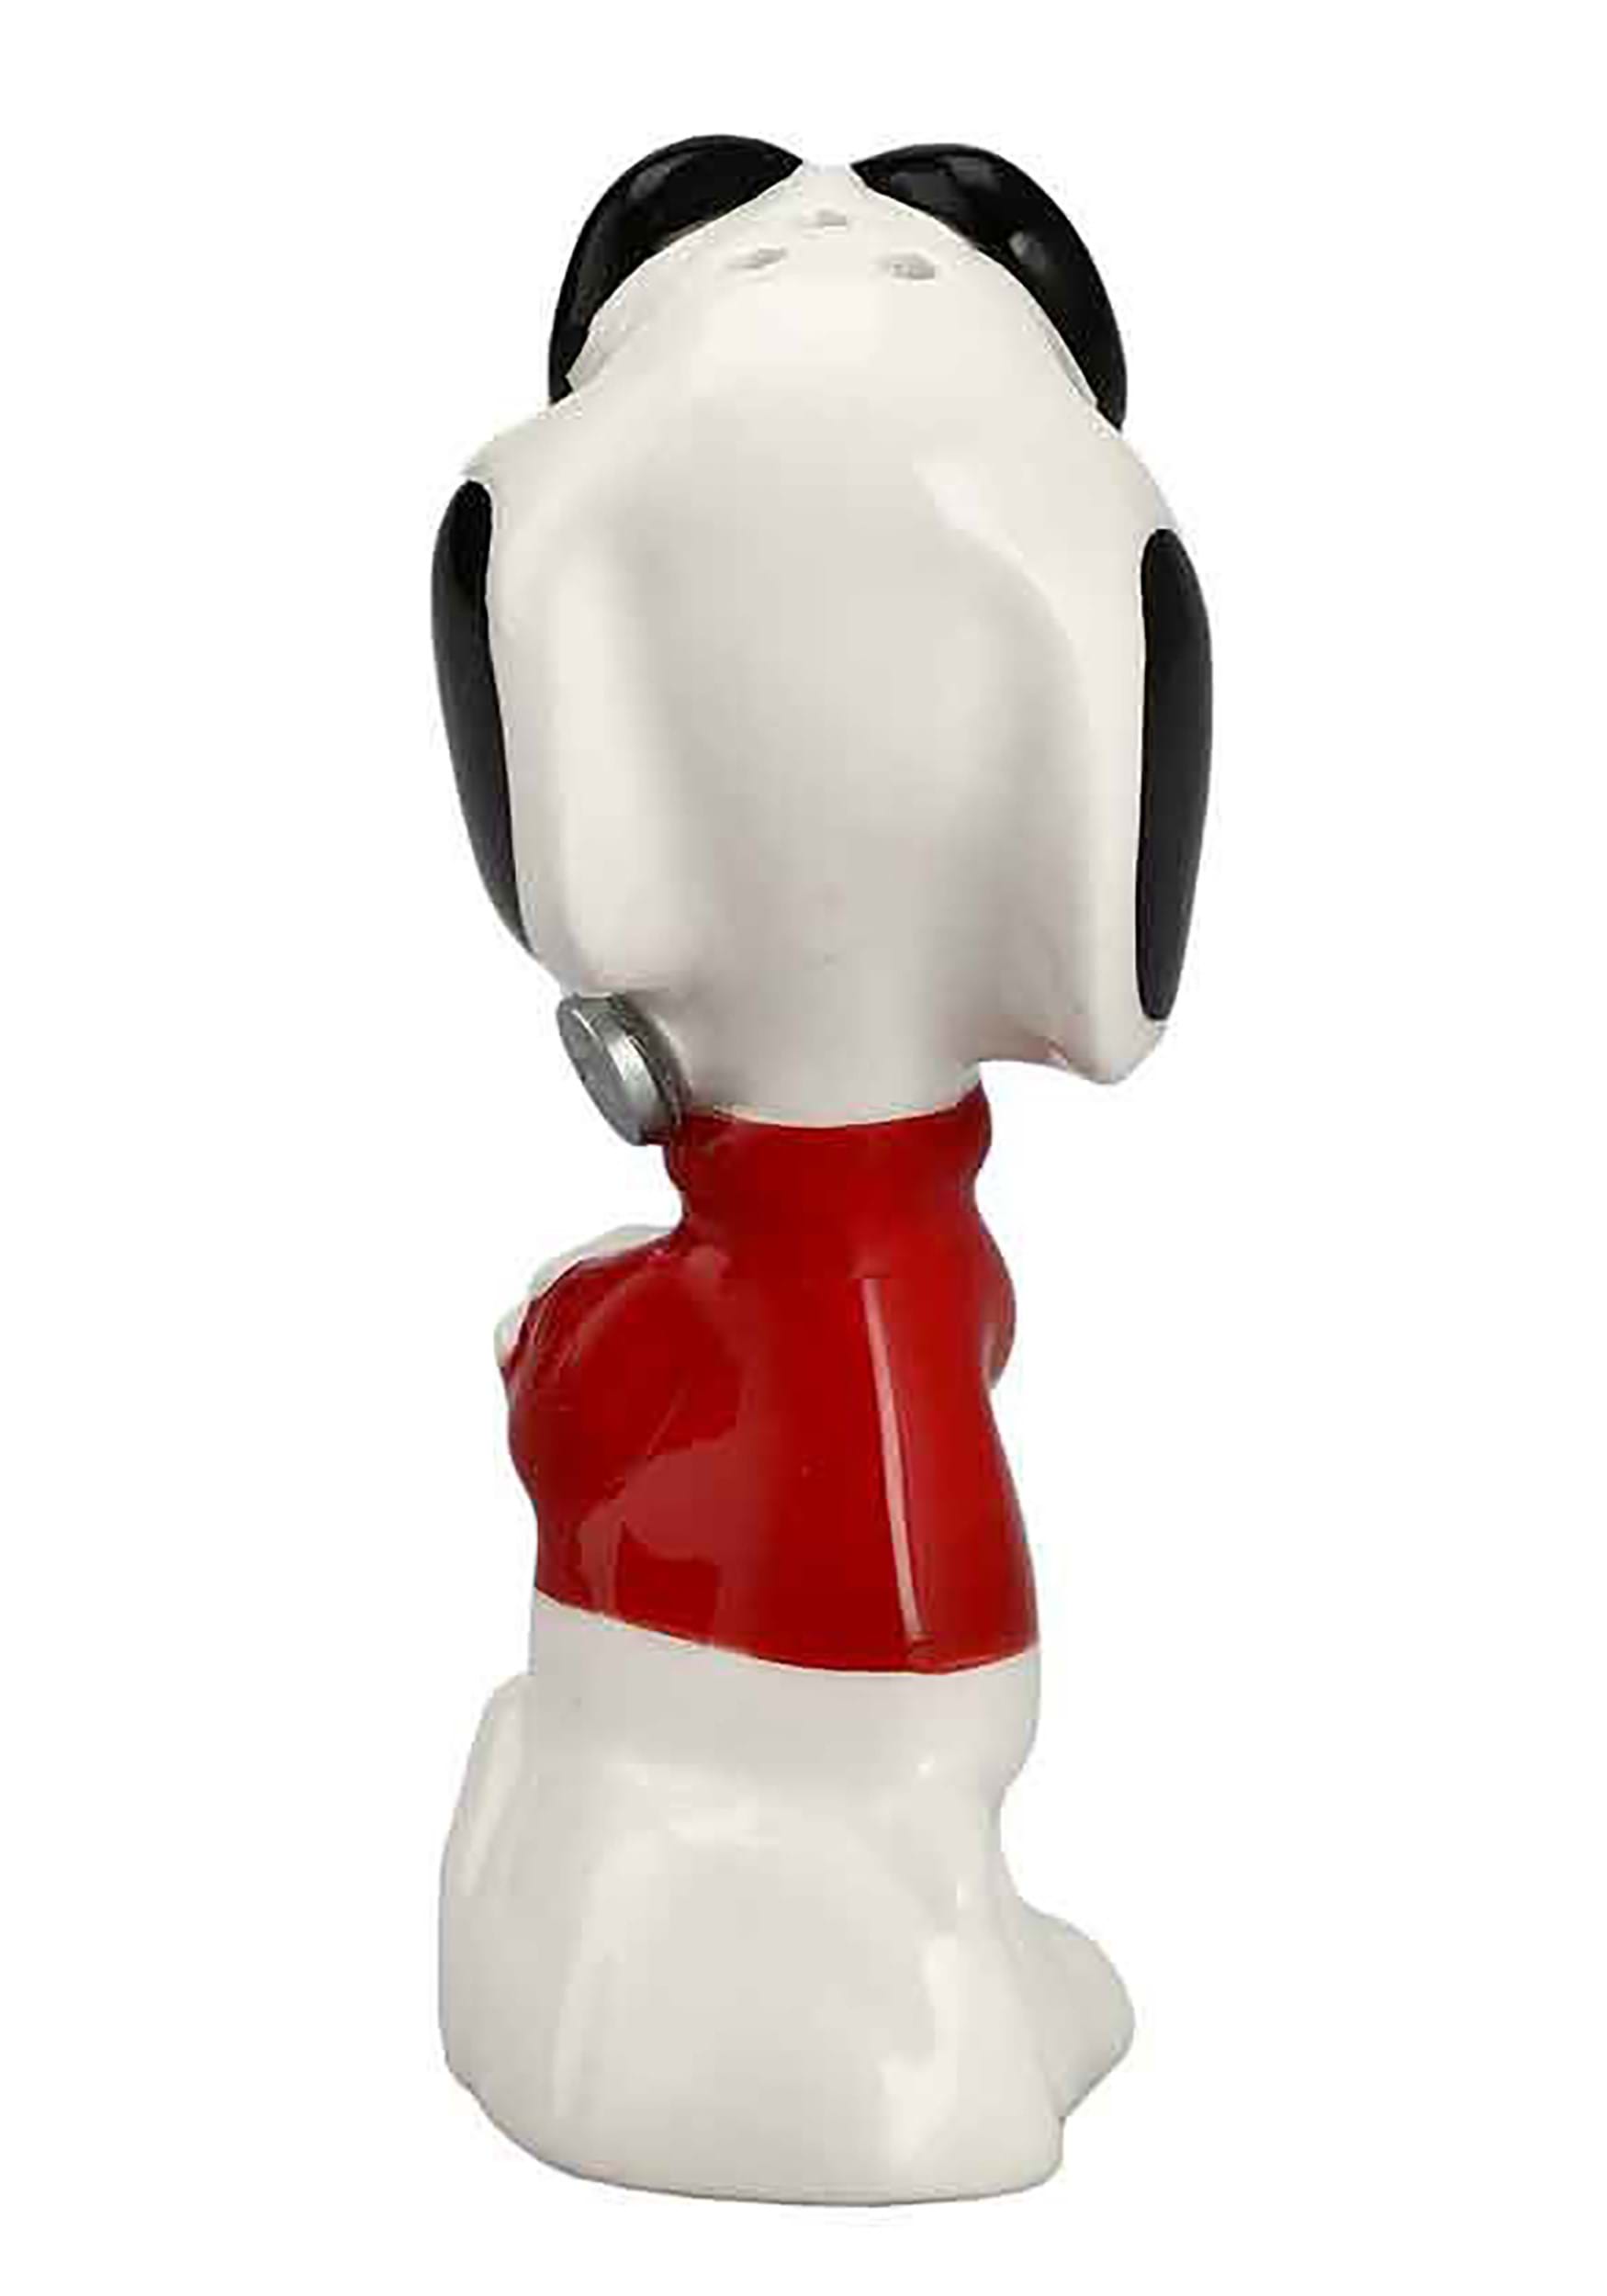 Peanuts Snoopy Joe Cool Roly-Poly Drinking Glass